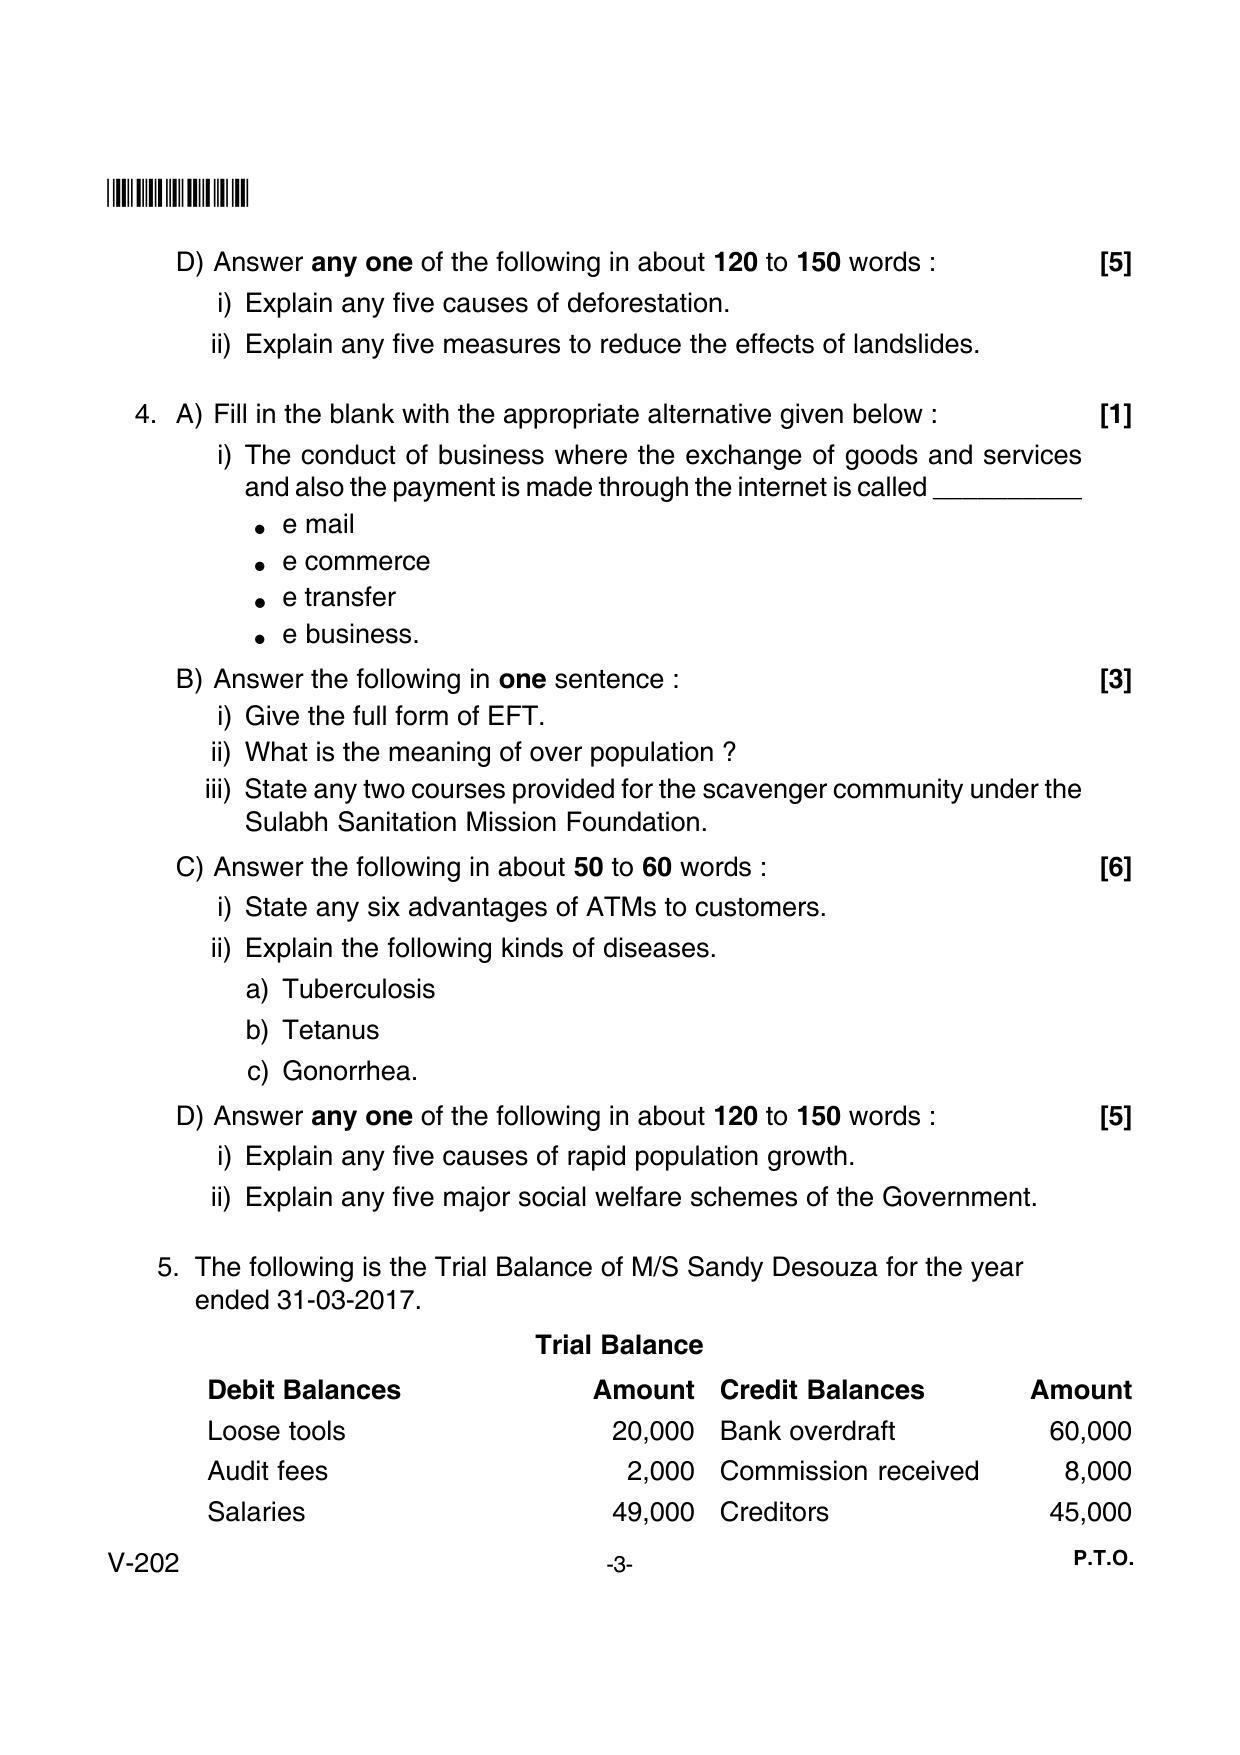 Goa Board Class 12 General Foundation Course  Voc 202 New Pattern (March 2018) Question Paper - Page 3